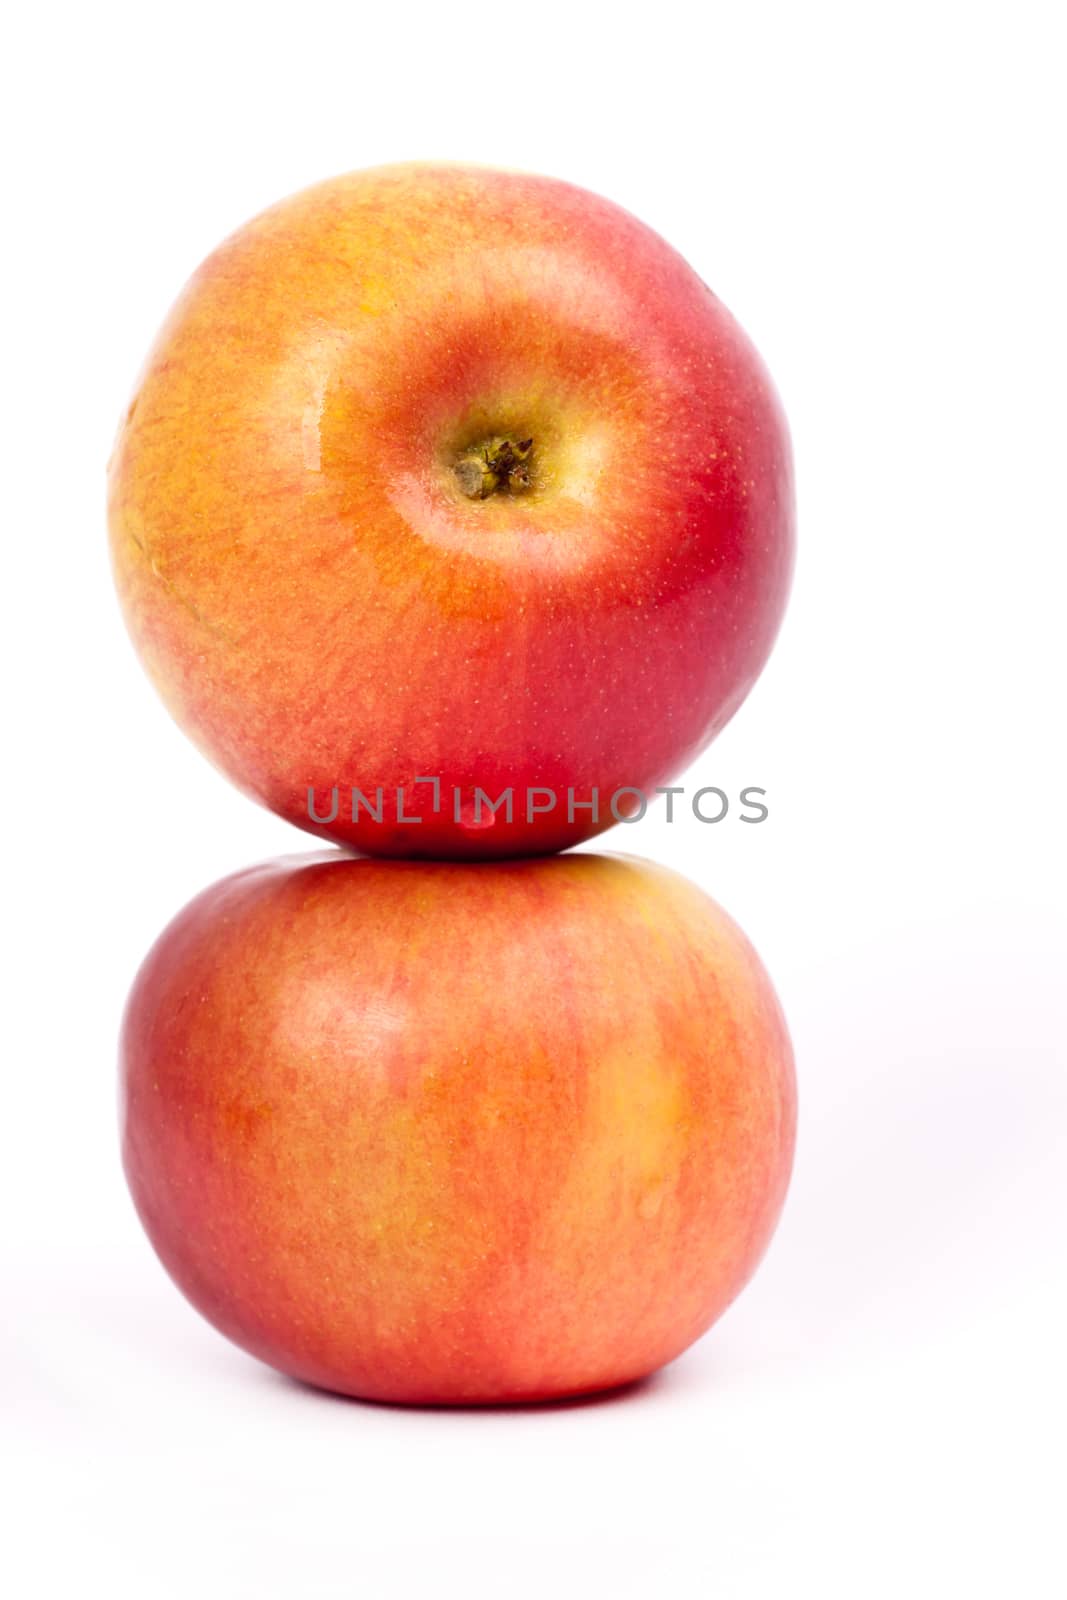 Two red apples on a light background